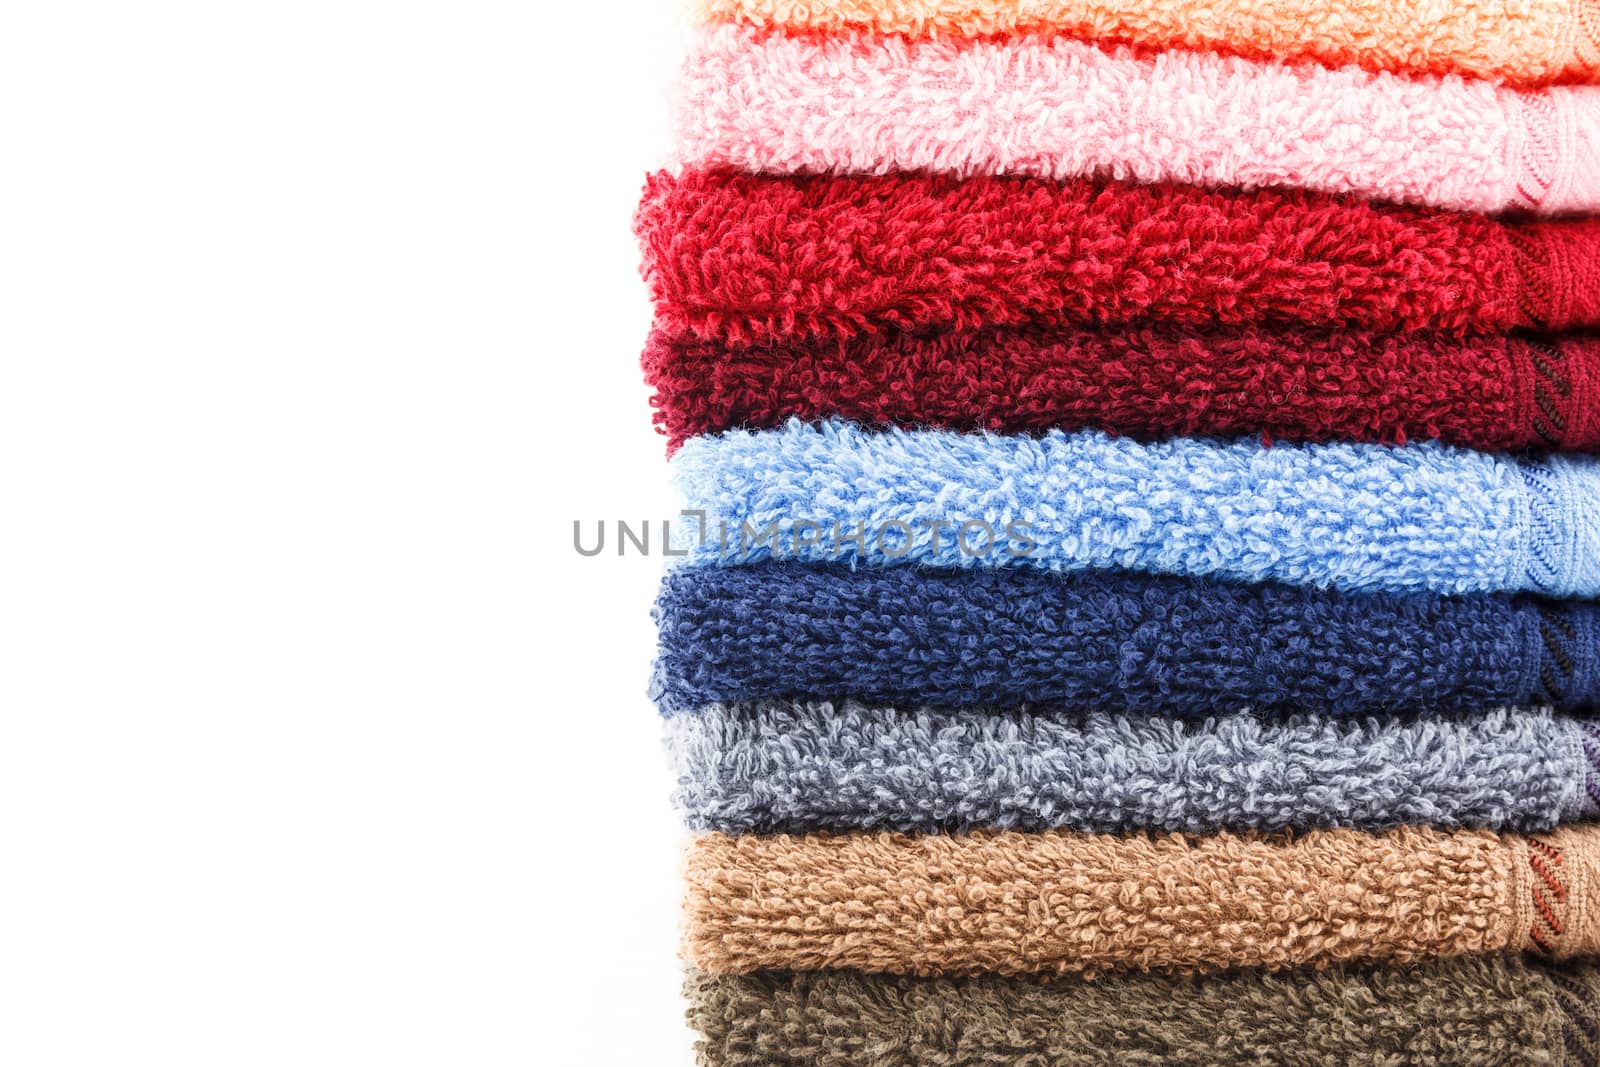 Stack of colorful towels isolated on white background